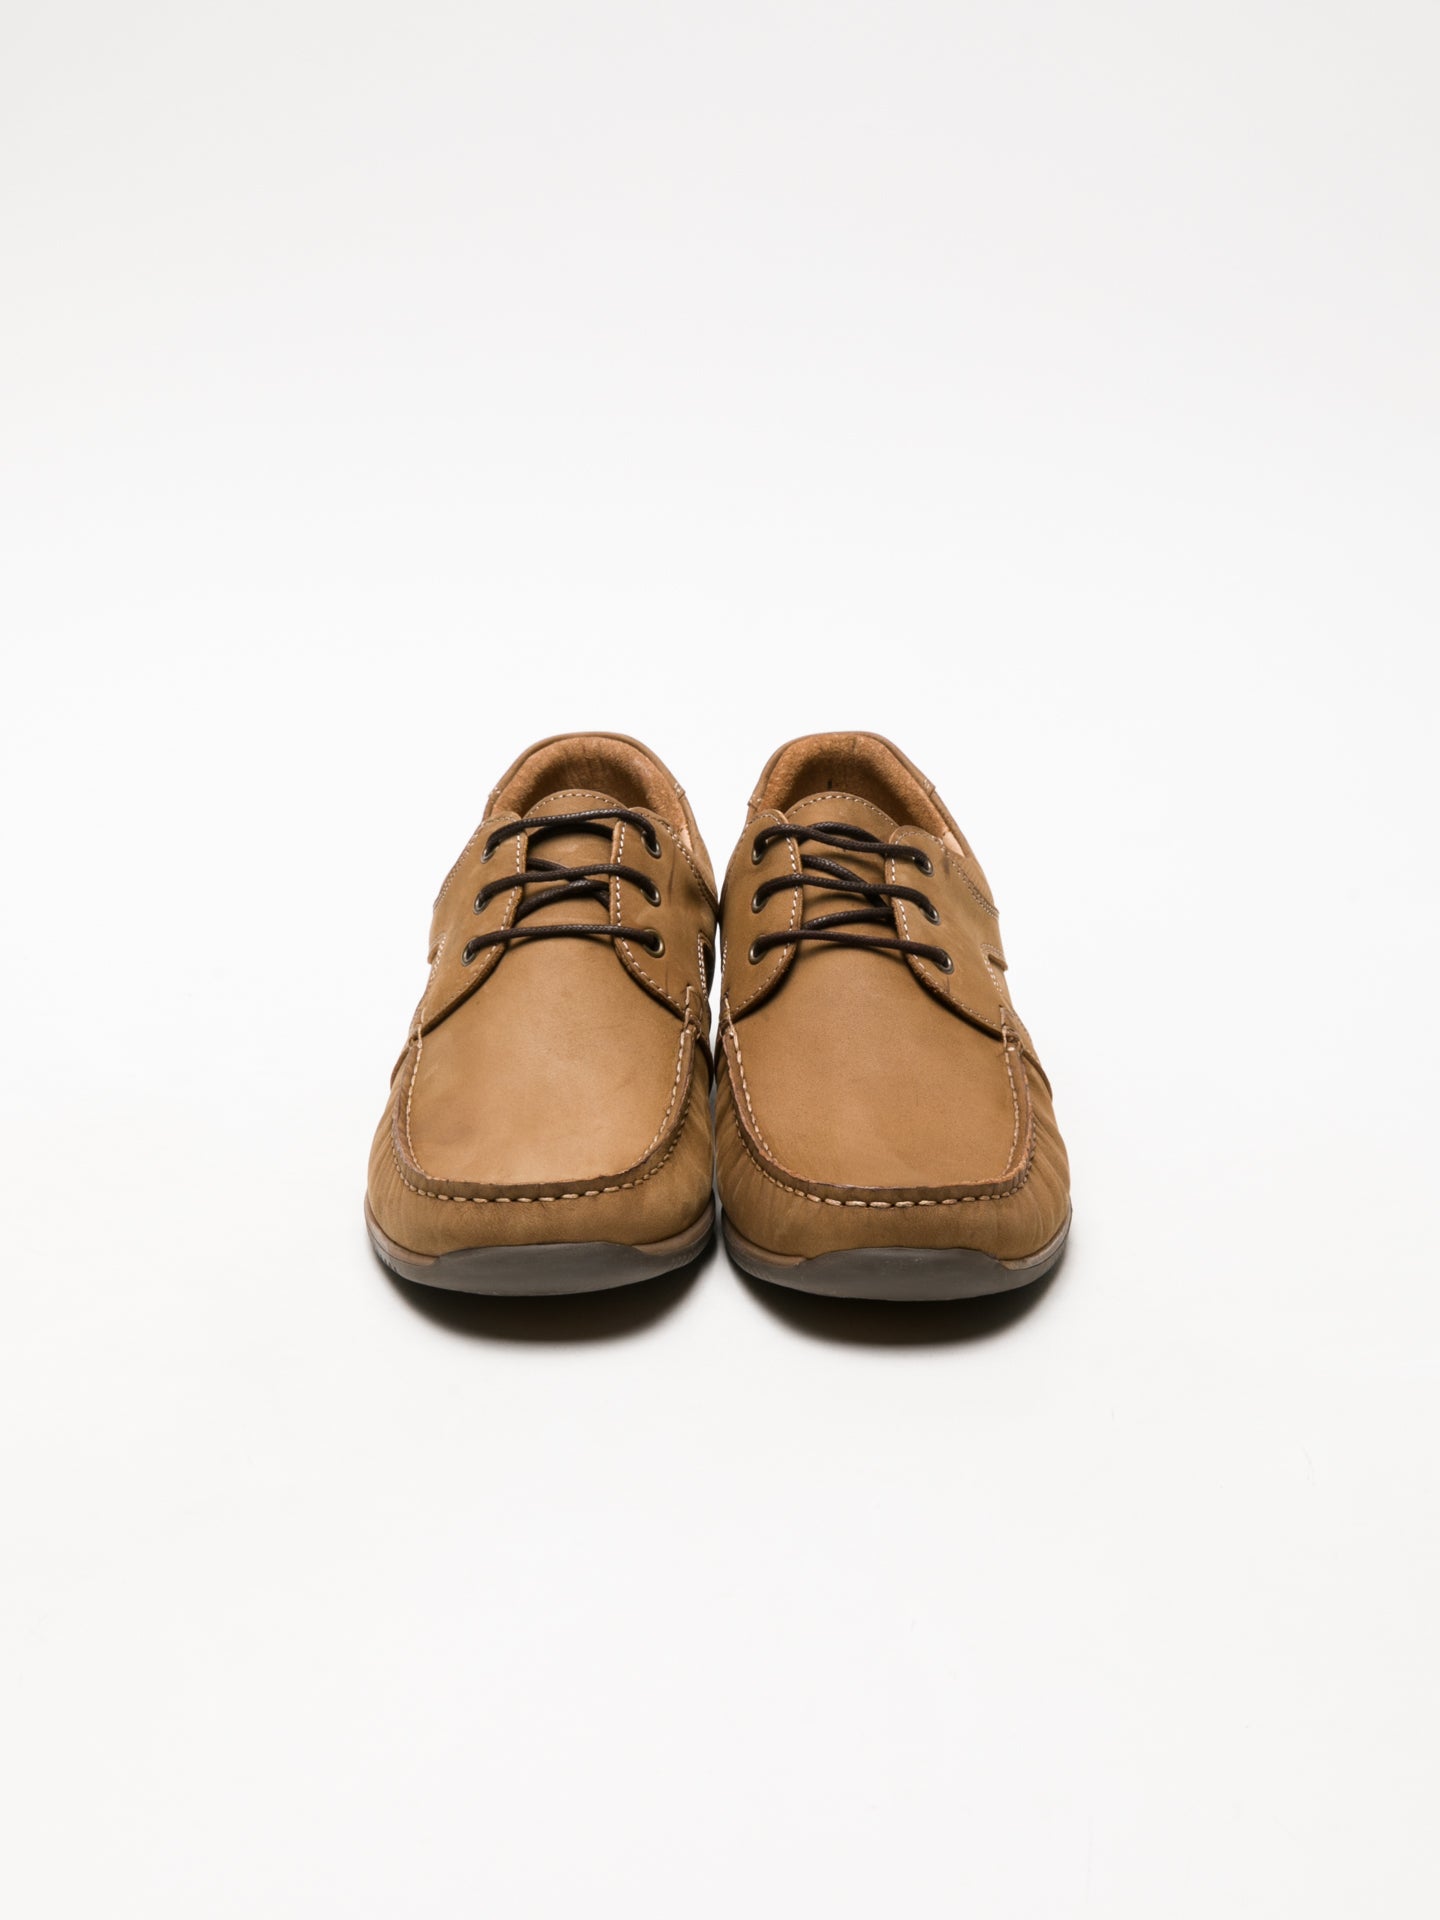 Foreva Tan Lace Fastening Shoes